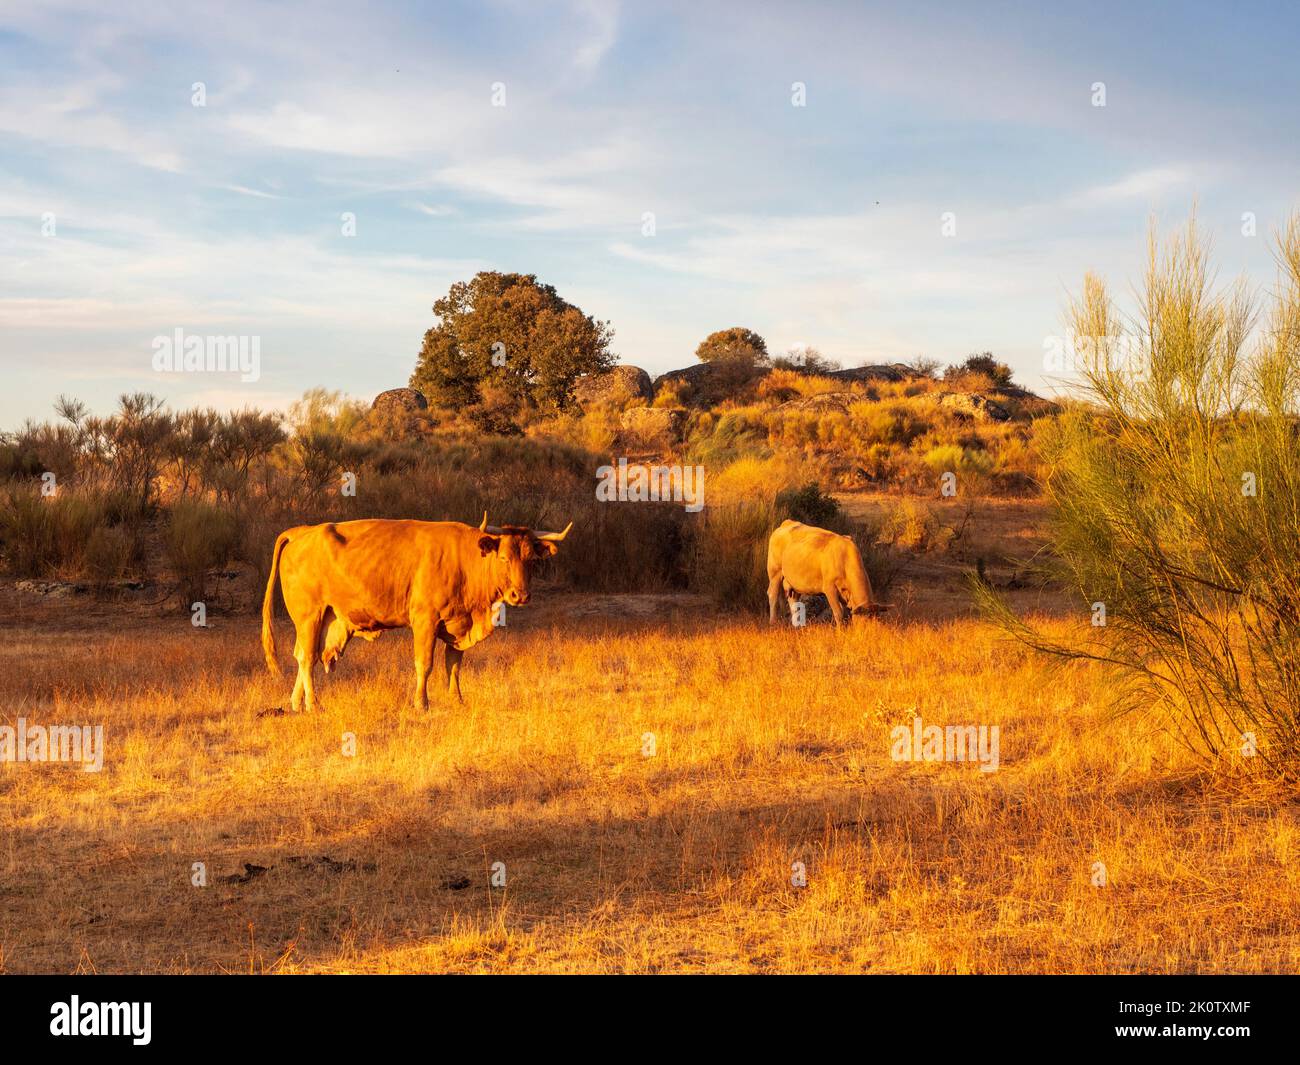 Cattle at sunset in Los Barruecos, Cáceres, Spain Stock Photo